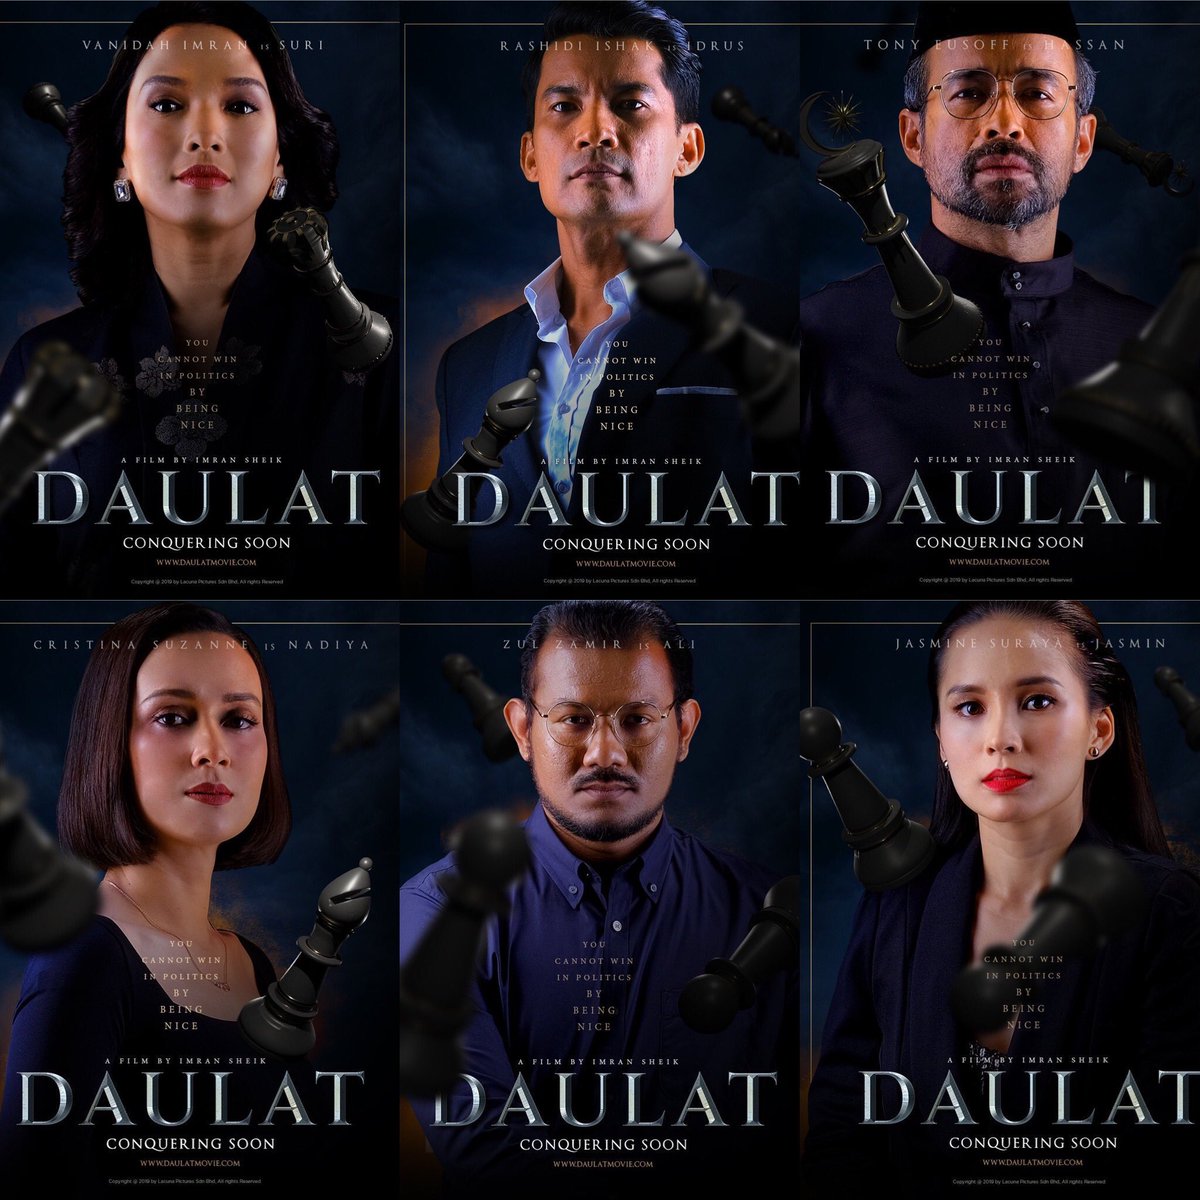 Yes, many Malaysians can relate to this DAULAT and yes, I think some might get triggered for its blatant honesty to portray politics ‘as it is’.Bear in mind DAULAT is a FICTION political thriller. Tak ada kena mengena dengan yang hidup atau mati. Kalau adapun hanya kebetulan